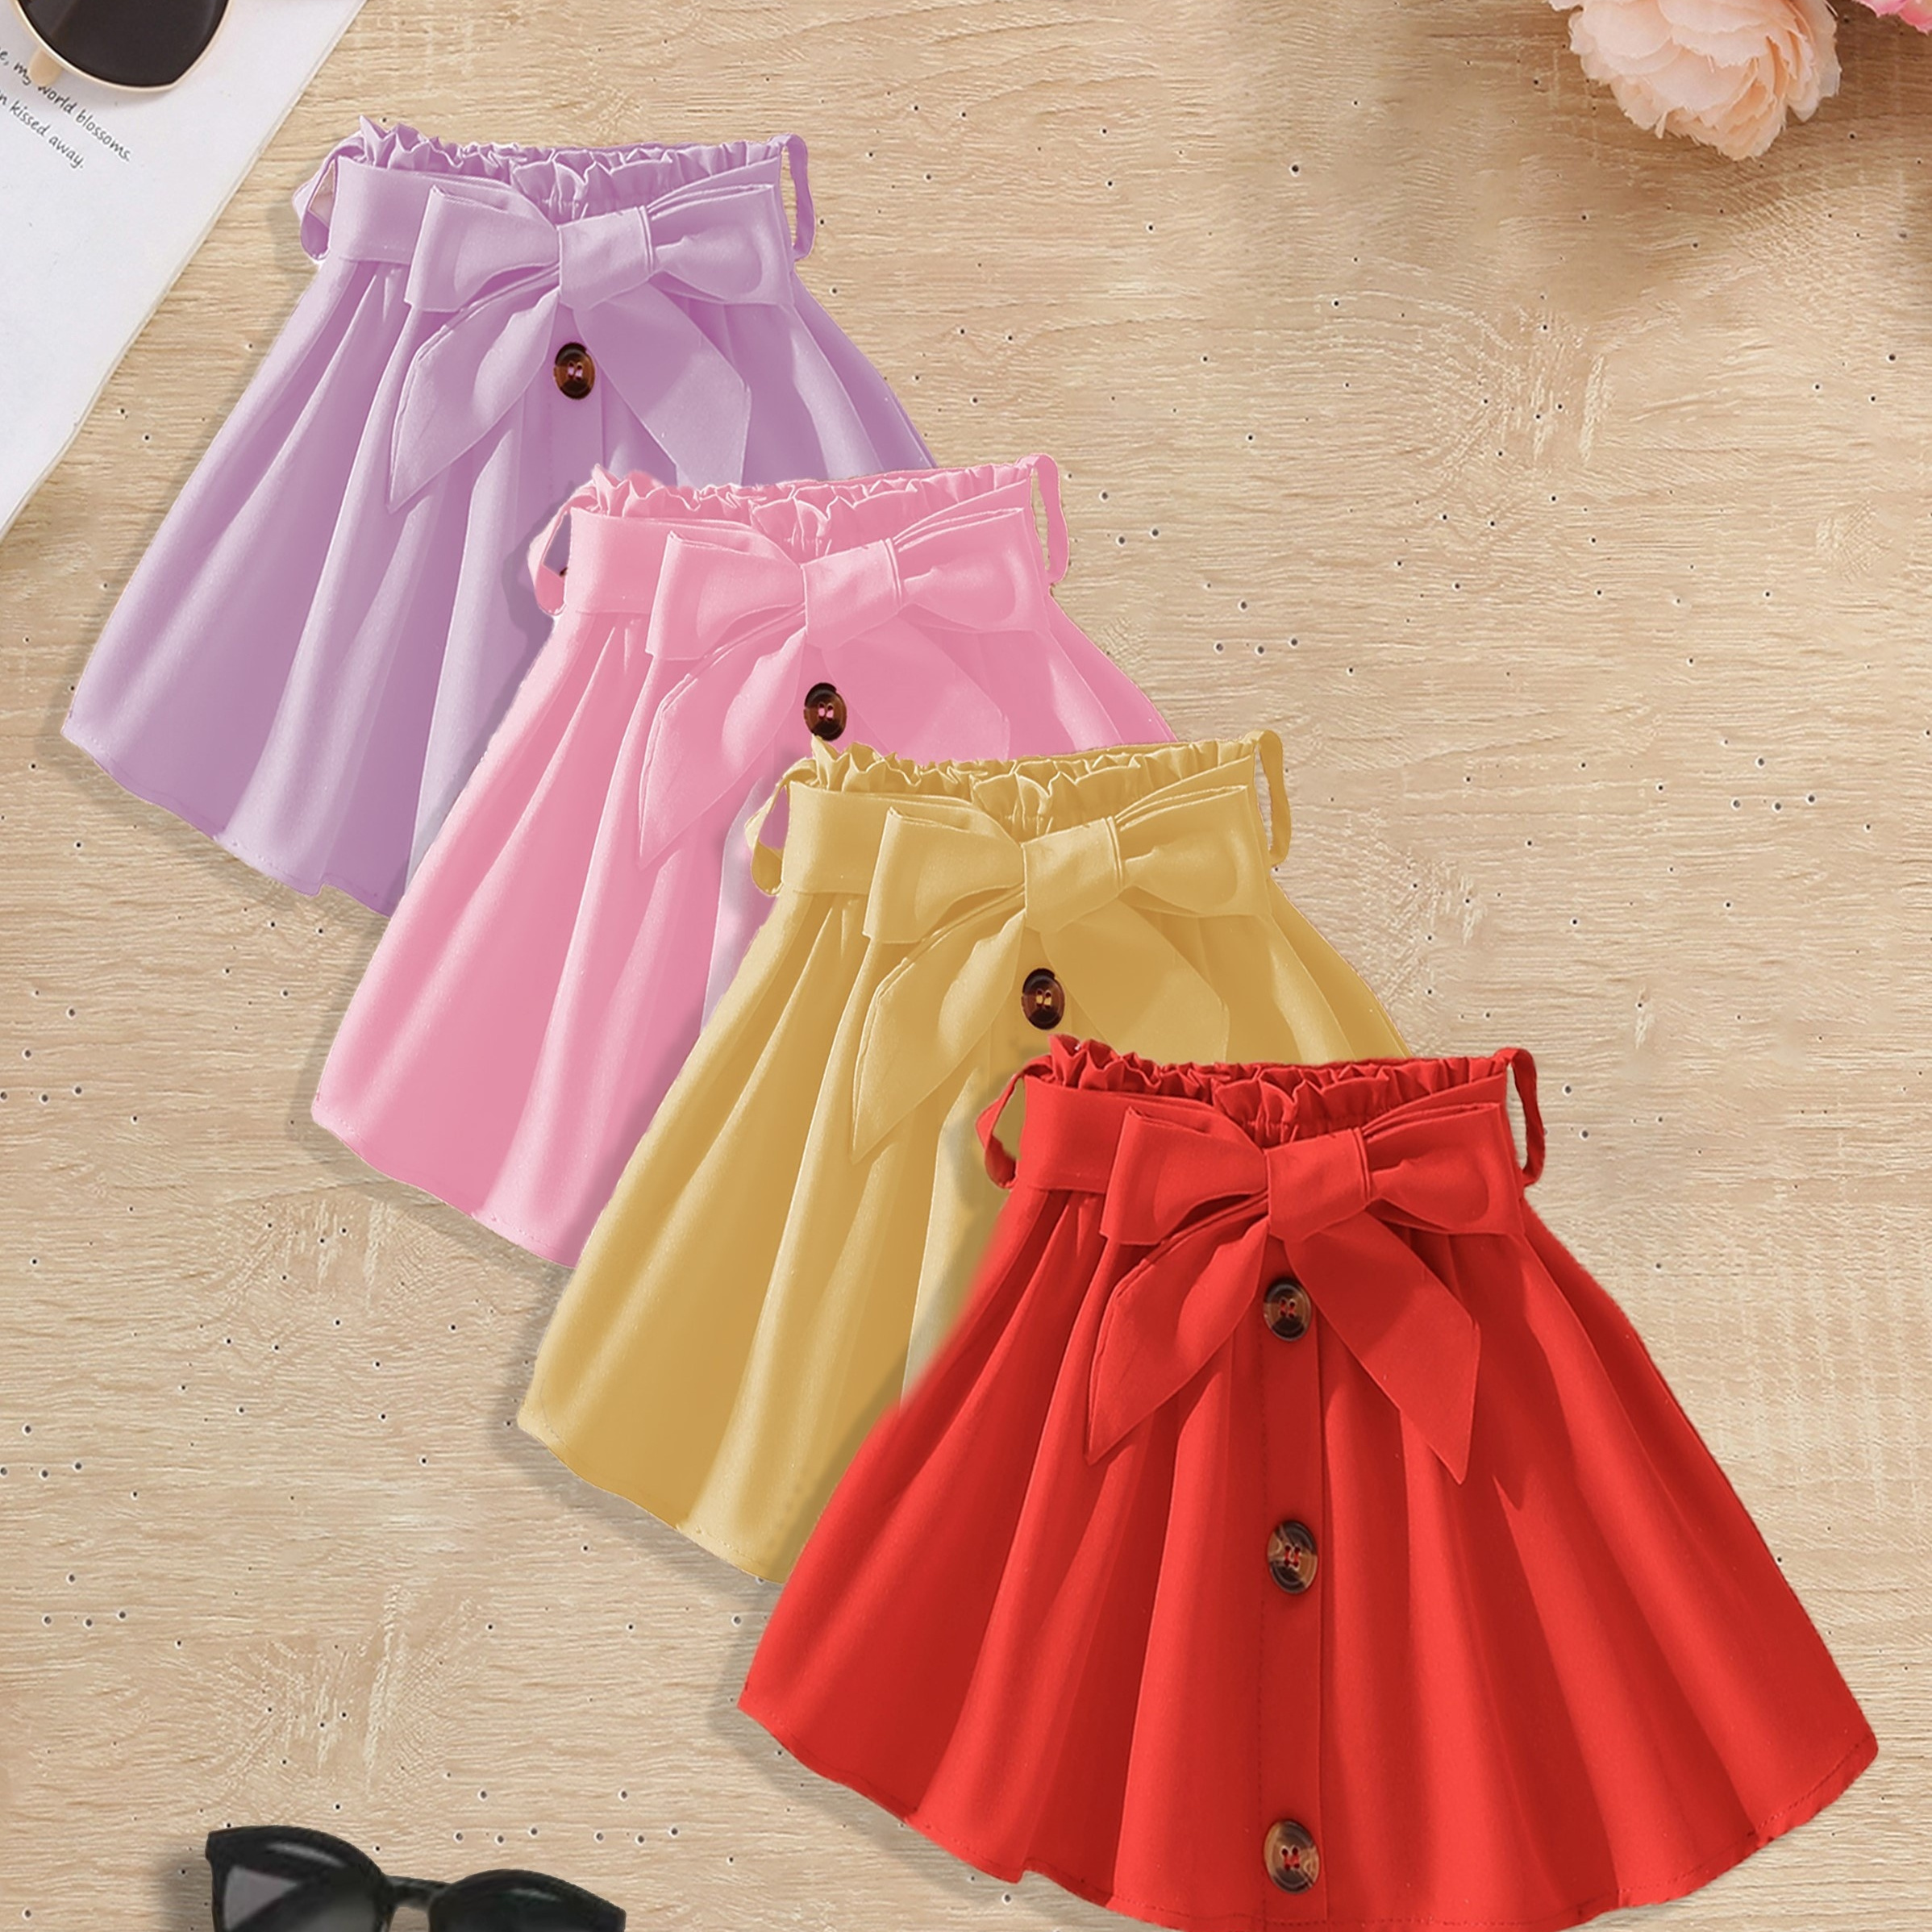 

4-pack Girls Fashion Pleated Skirts, Casual Style, Assorted Colors With Bow Detail, Button-up Front, For Kids